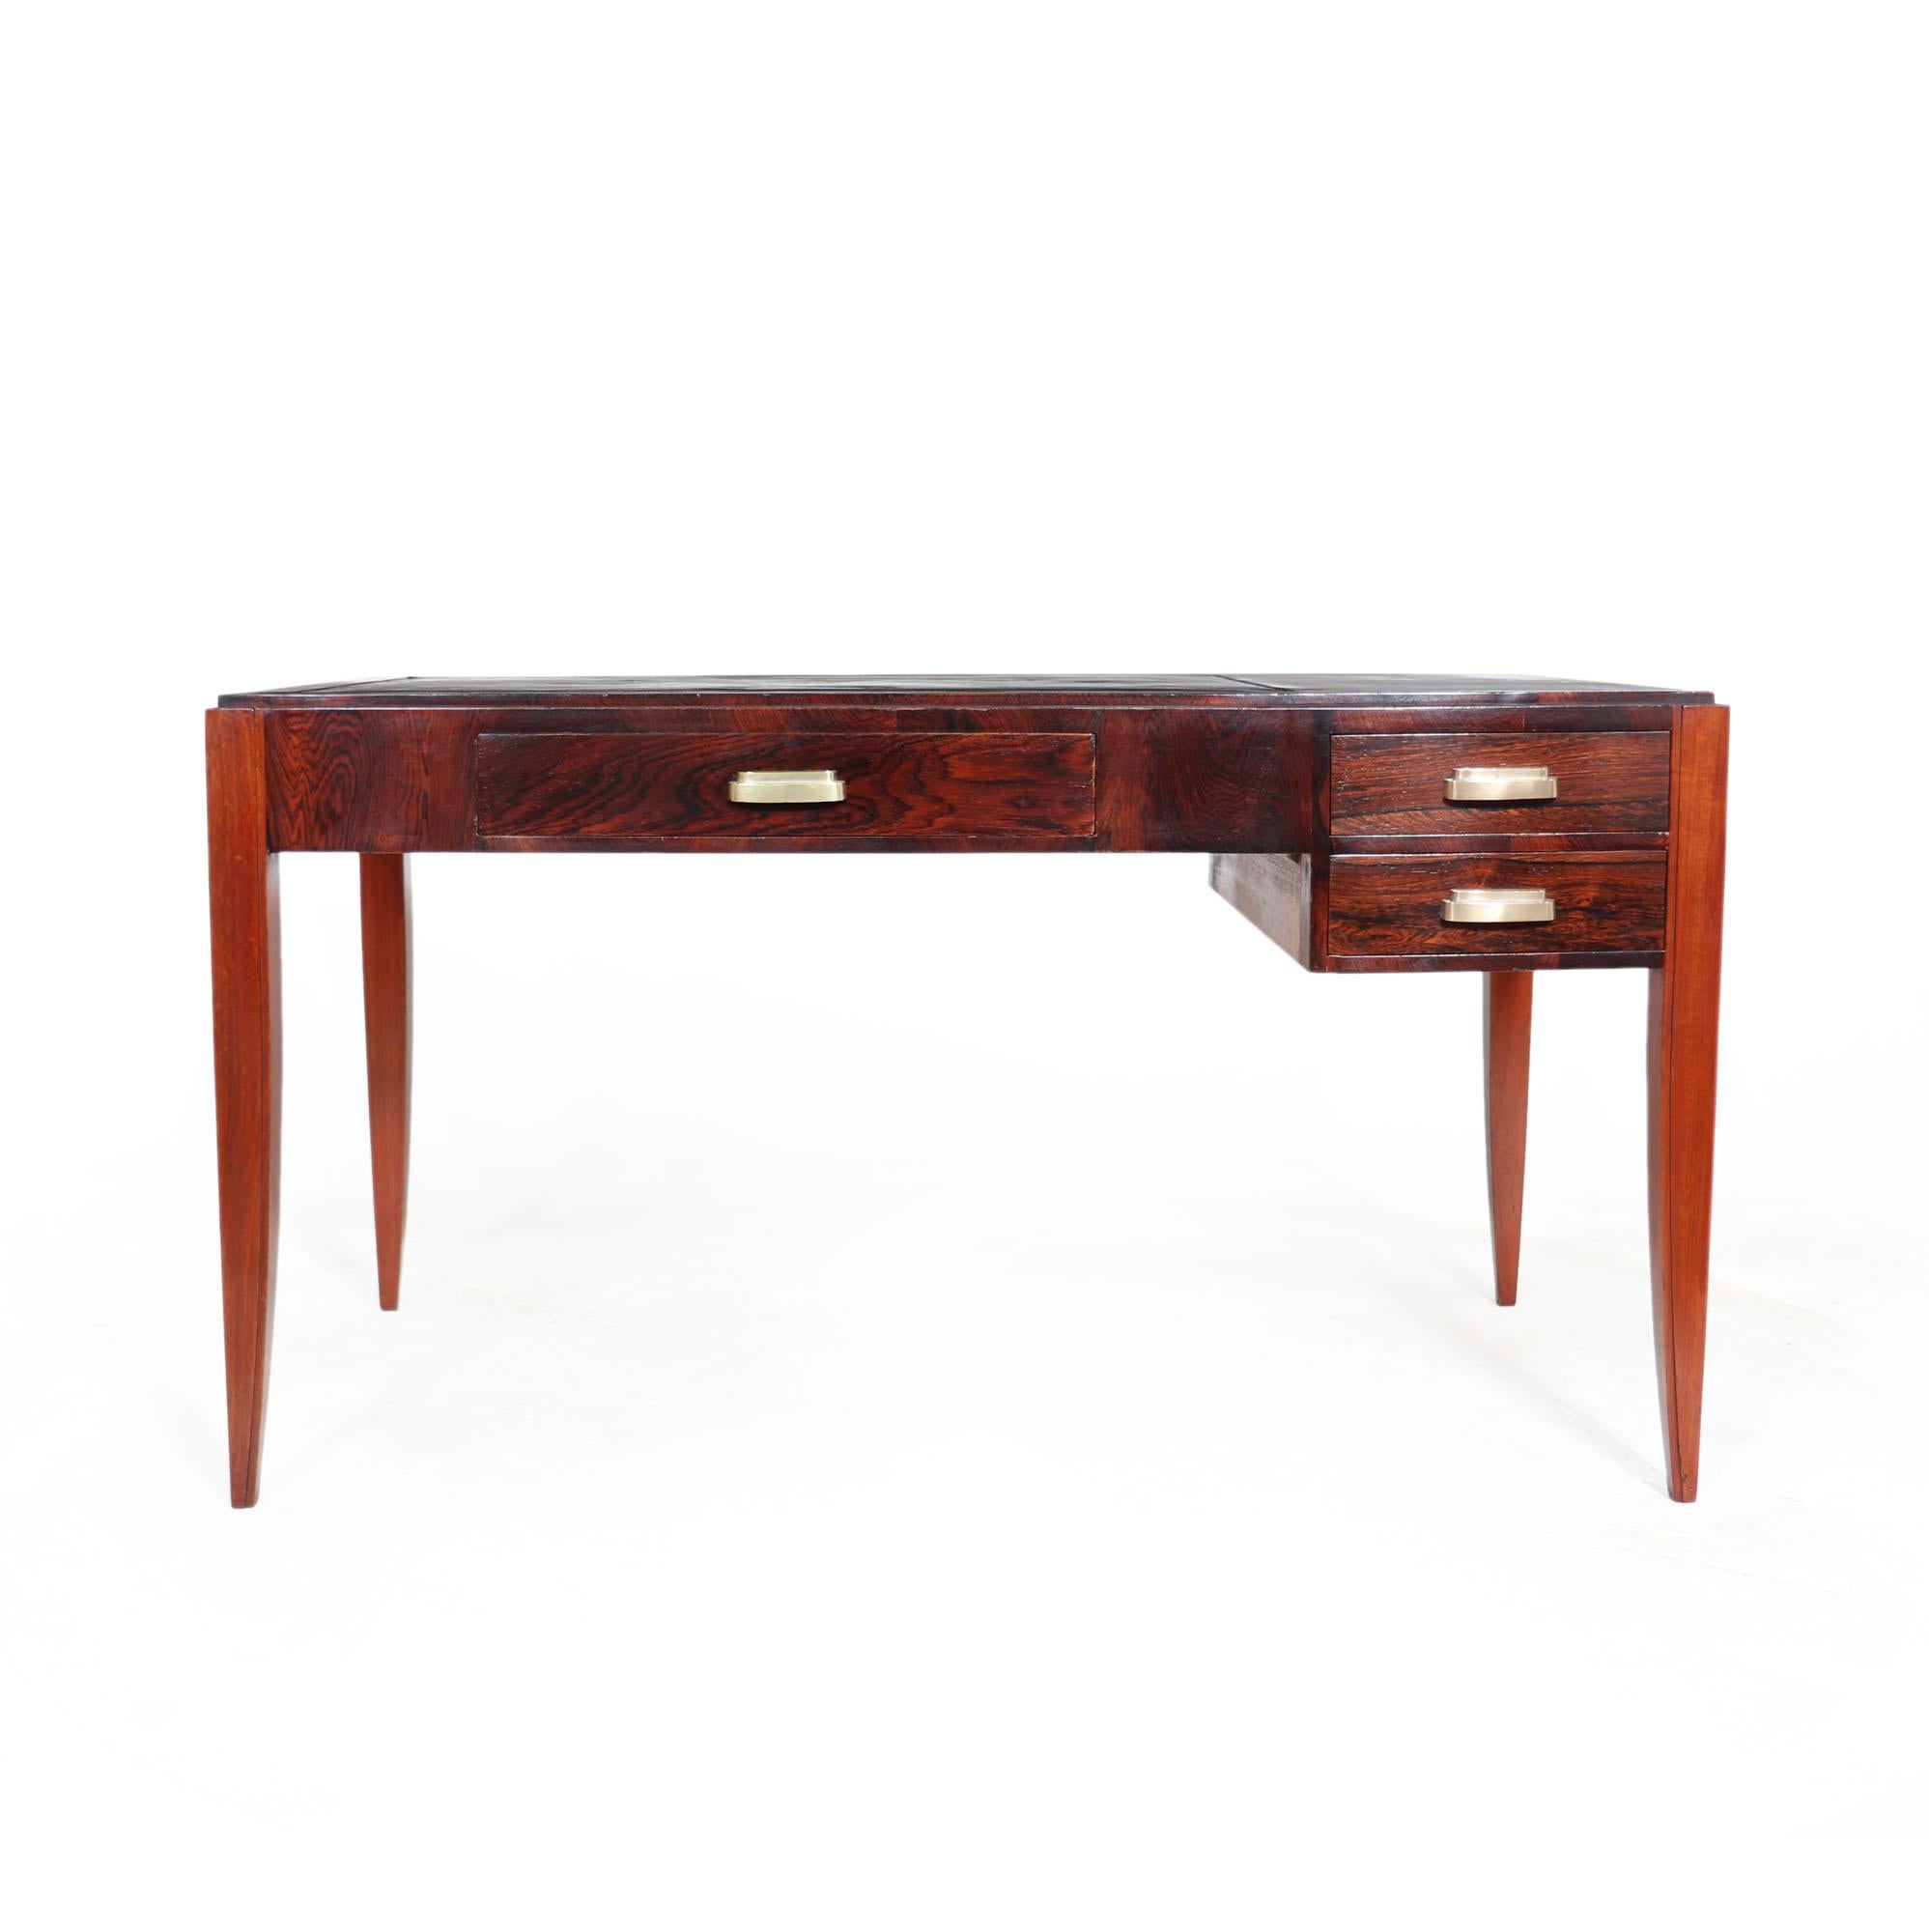 FRENCH ART DECO DESK
A great quality writing desk produced in France in the 1920s in rosewood with original leather that has later been blackened, solid oak frame and it has three drawers with lovely brass cup handles and sabre legs, the desk is in